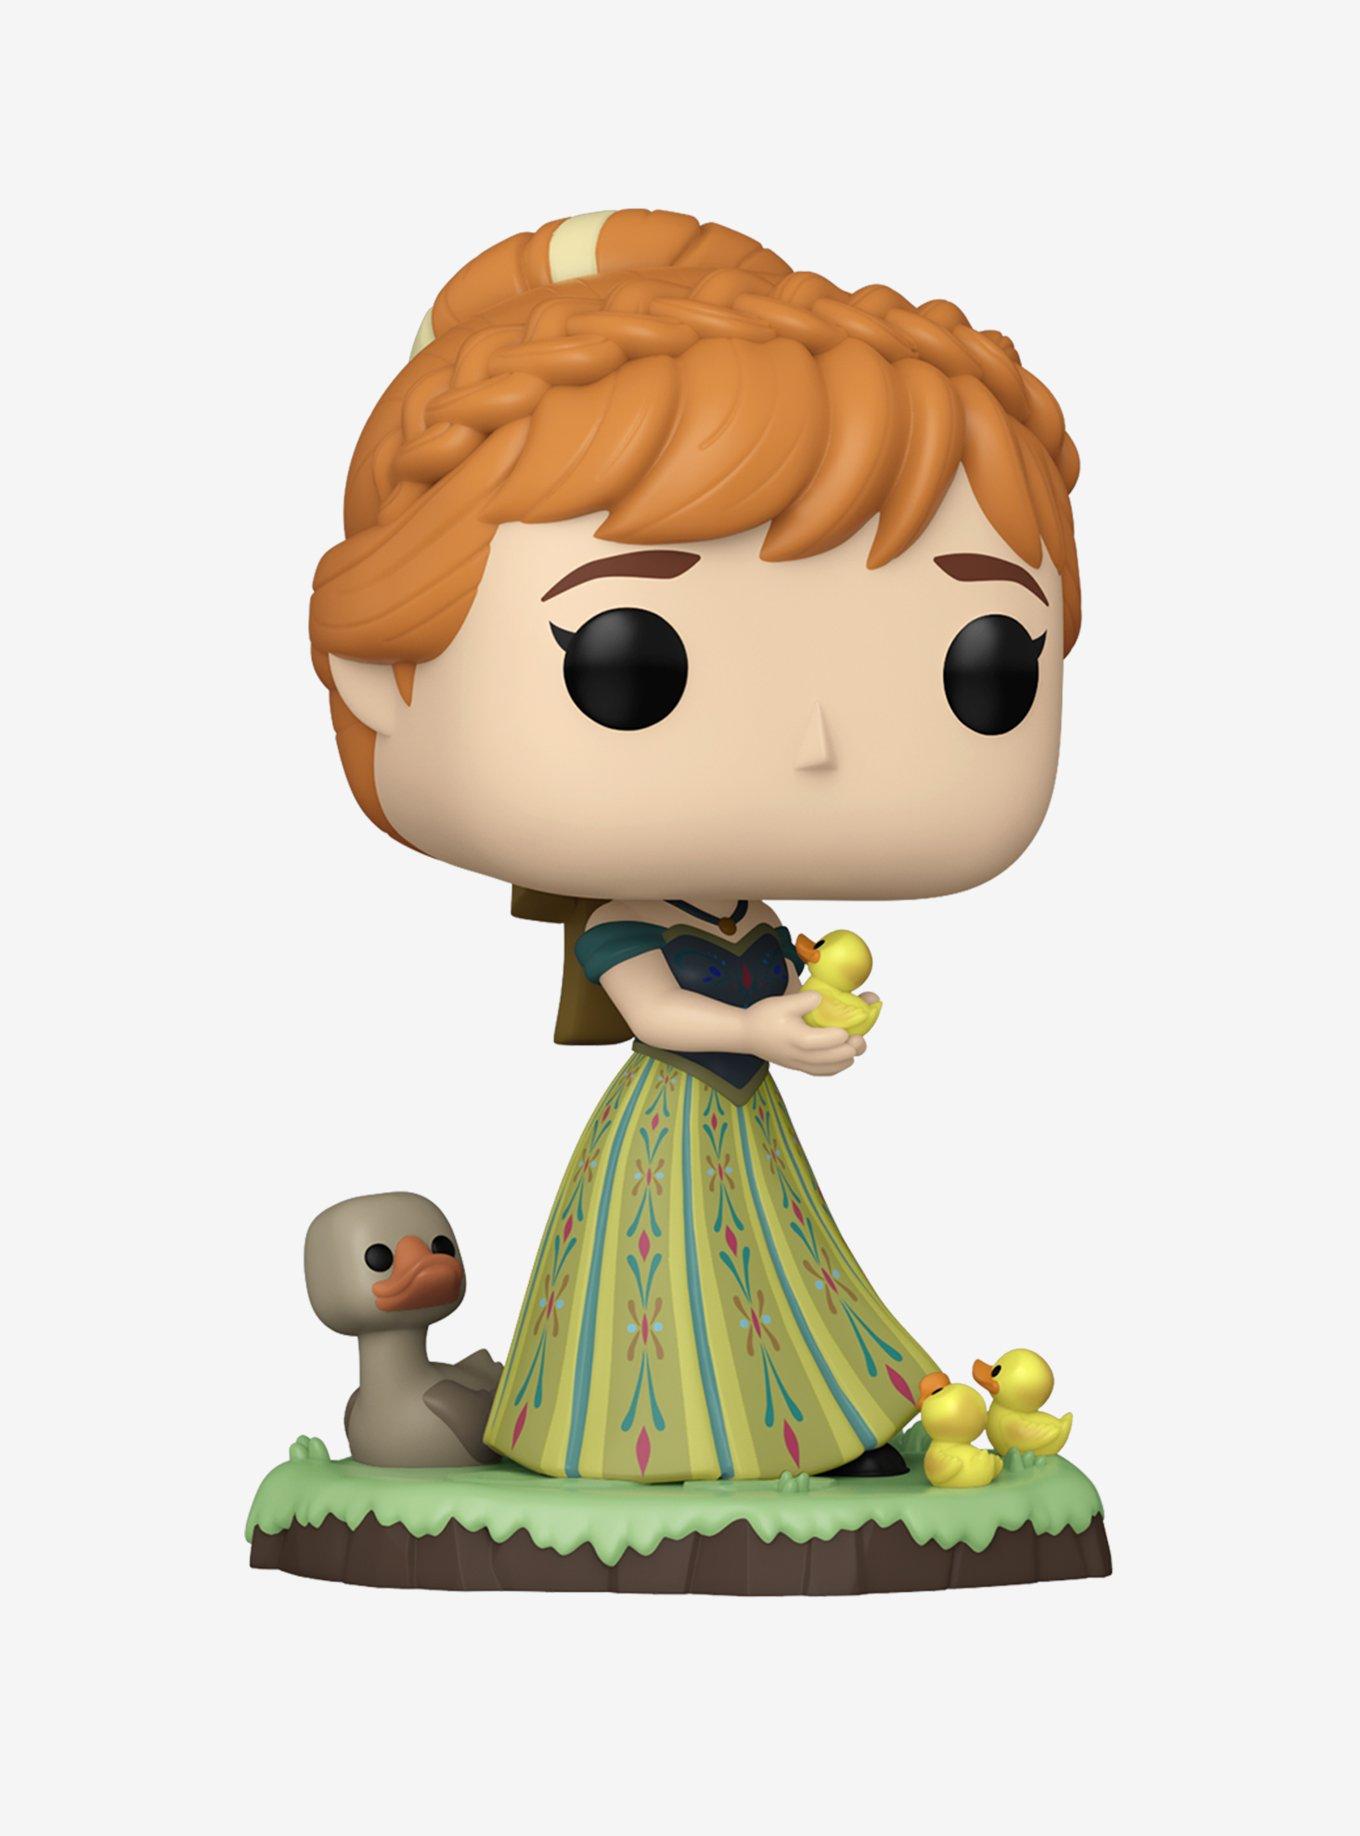 New Disney Funko Pop Pre-Orders: Ultimate Princess, Small World, and Luca